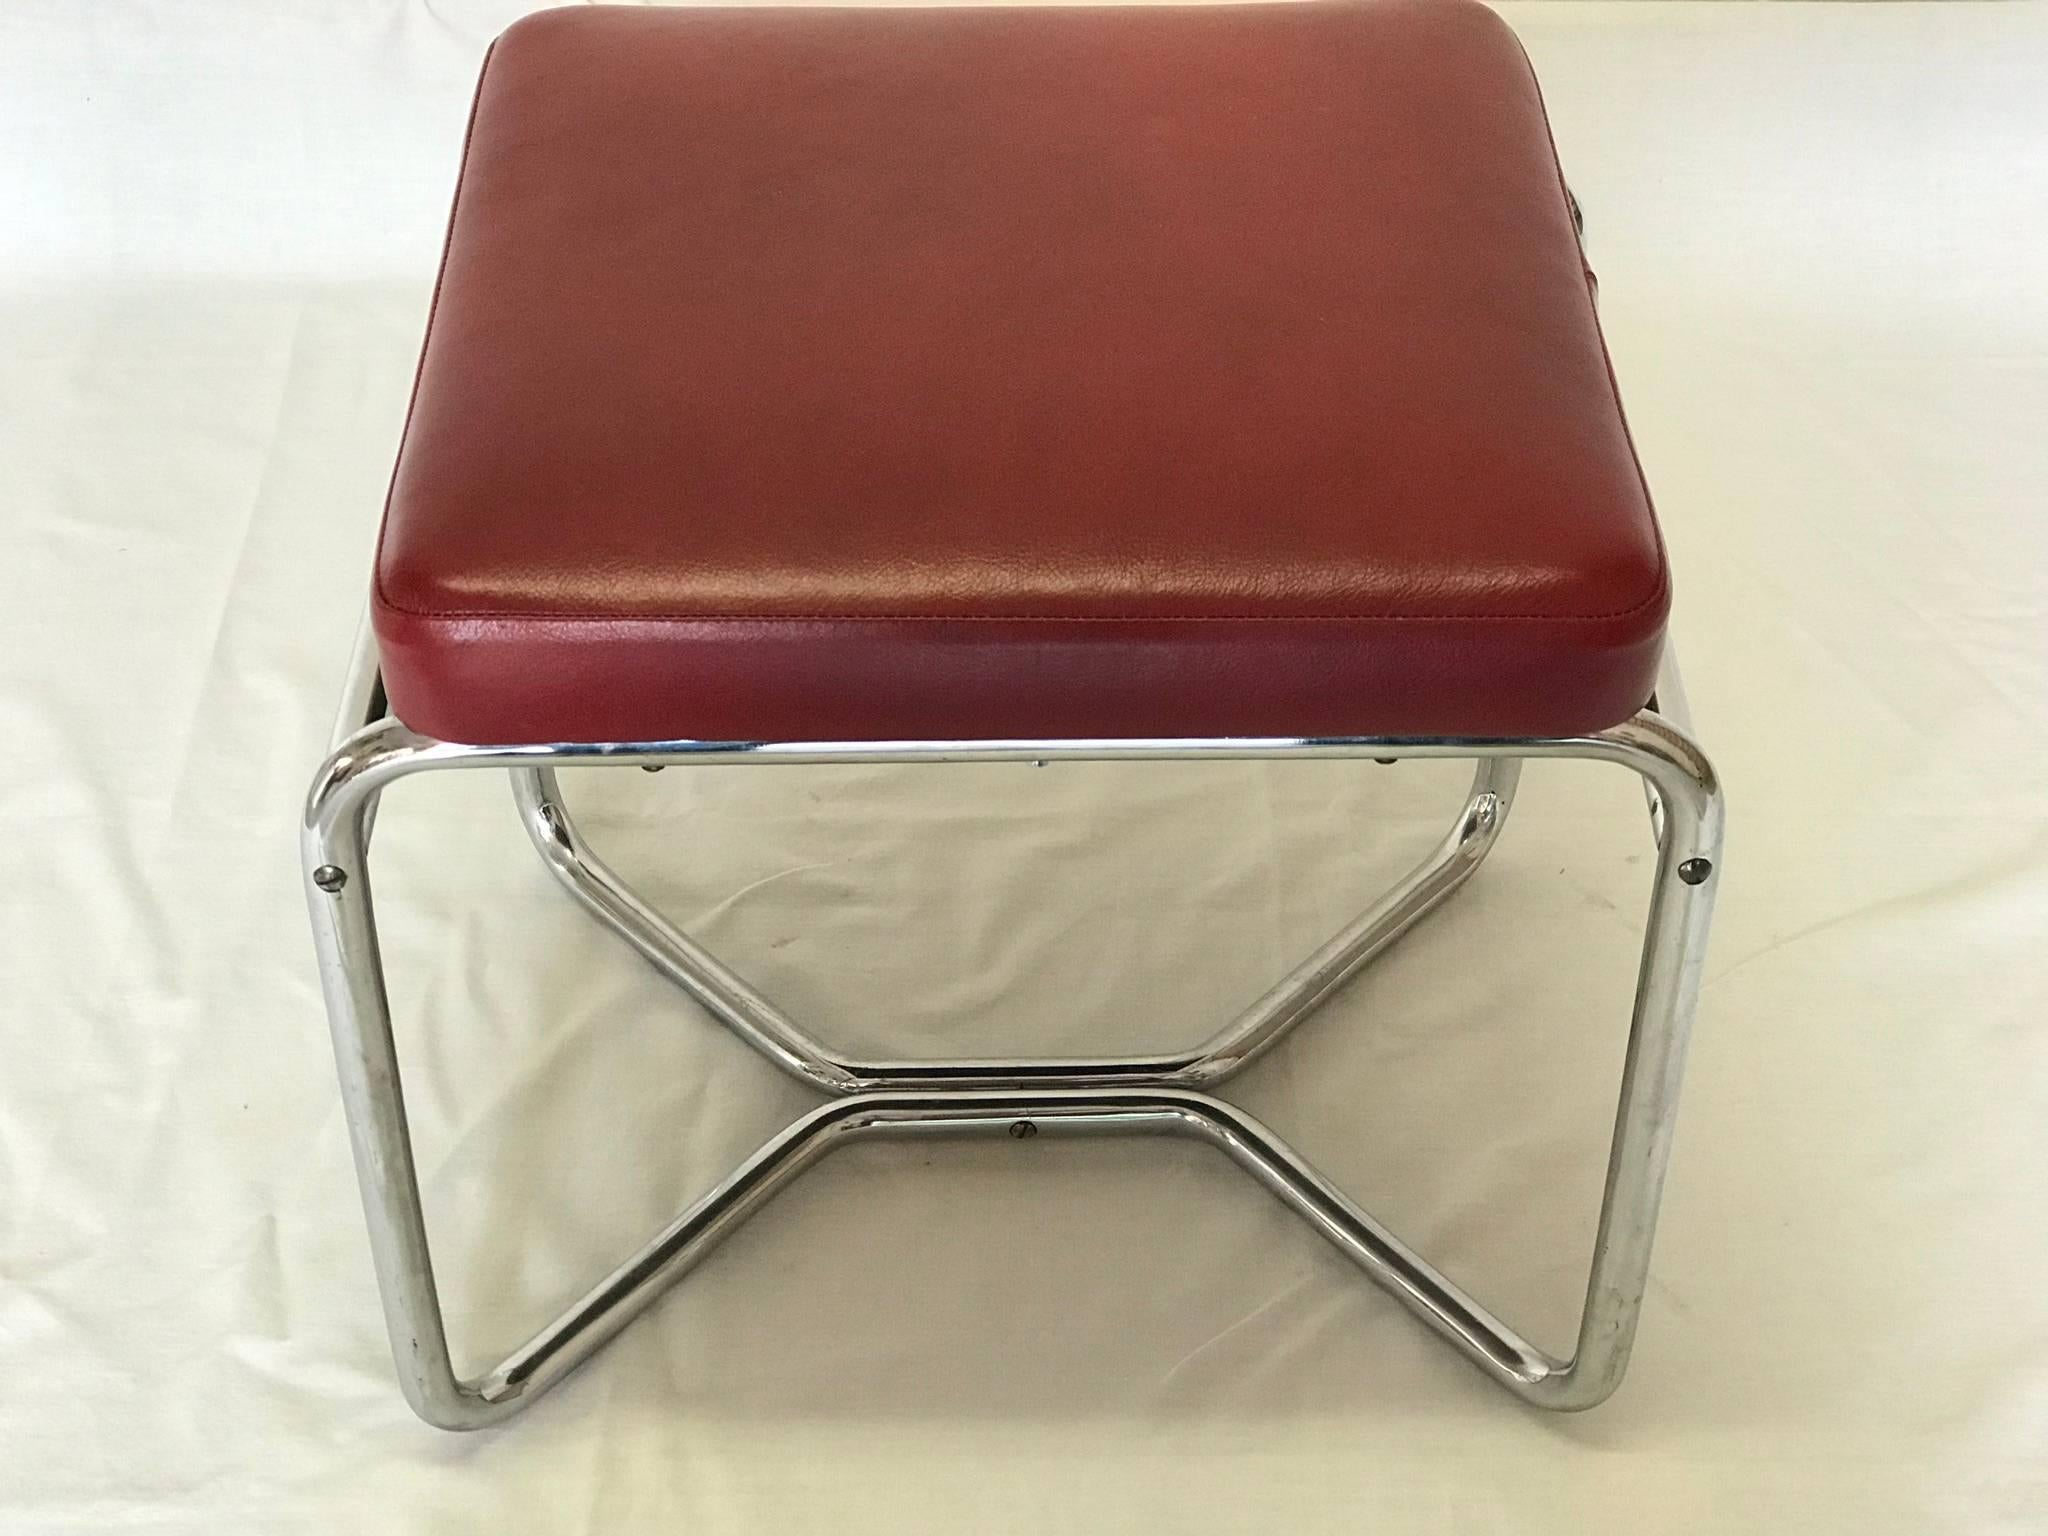 The Taburet is in a nice original condition. Chrome part only slightly wear. The seat is restored to the skin. The size of the seat itself 39.39.5cm.